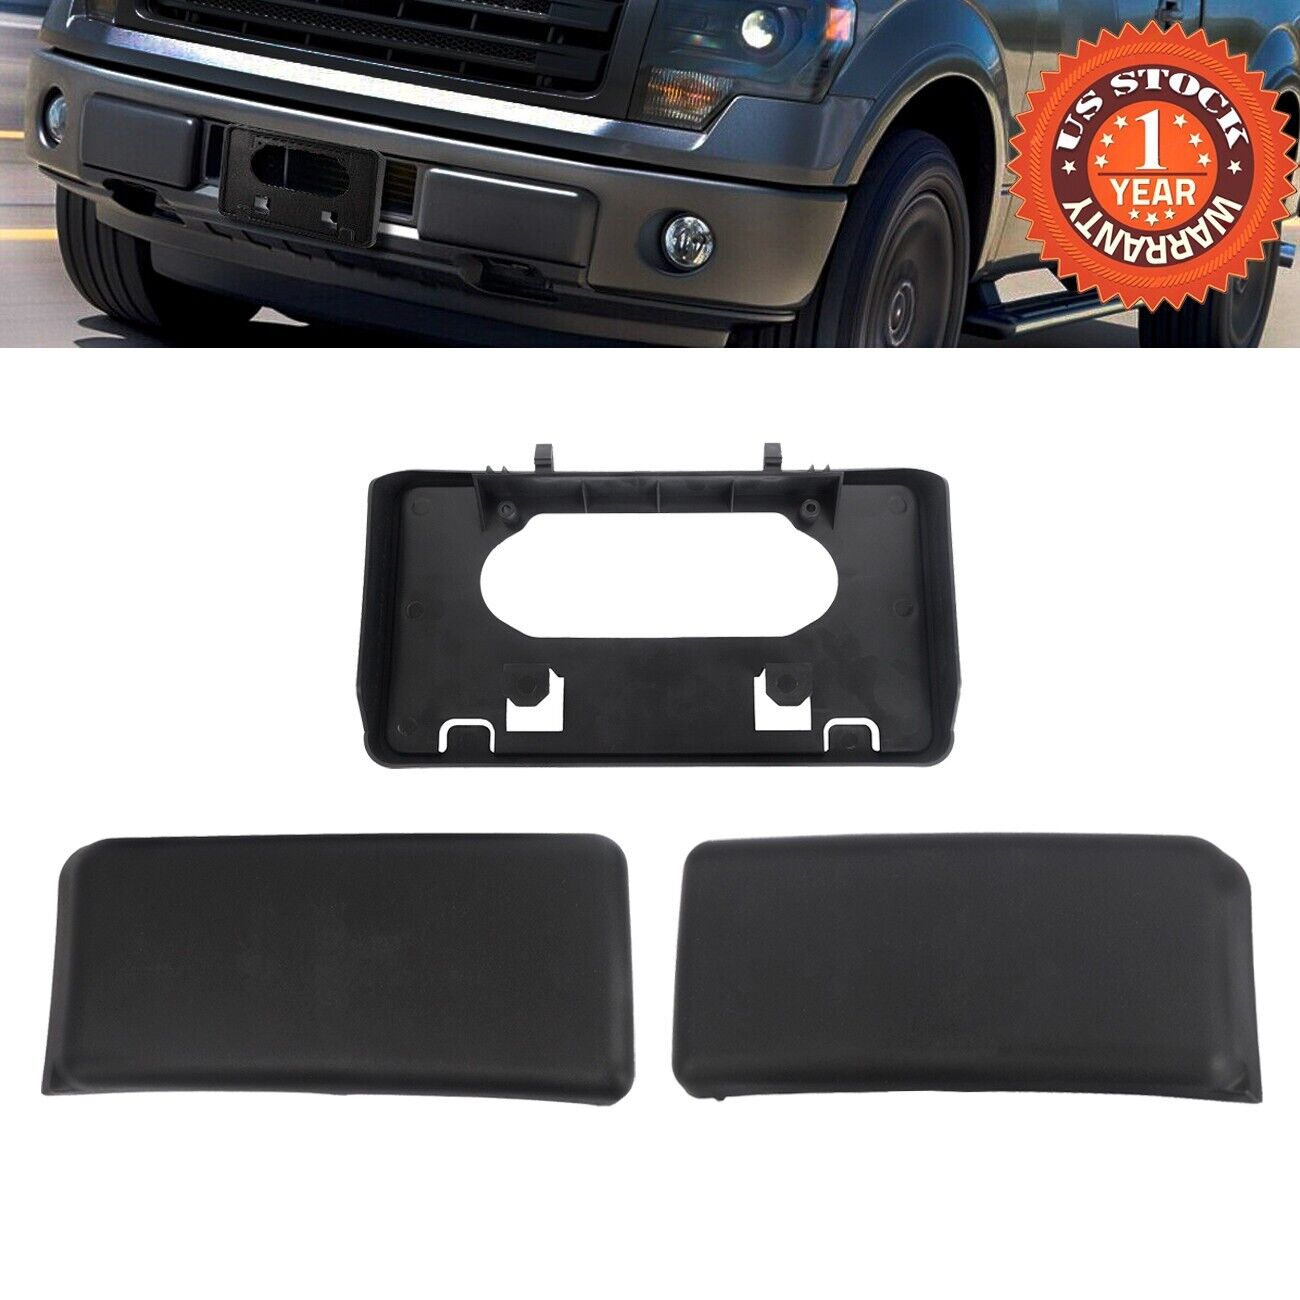 Front Bumper License Plate Bracket + Guards Pads Cap For 2009-2014 Ford F150